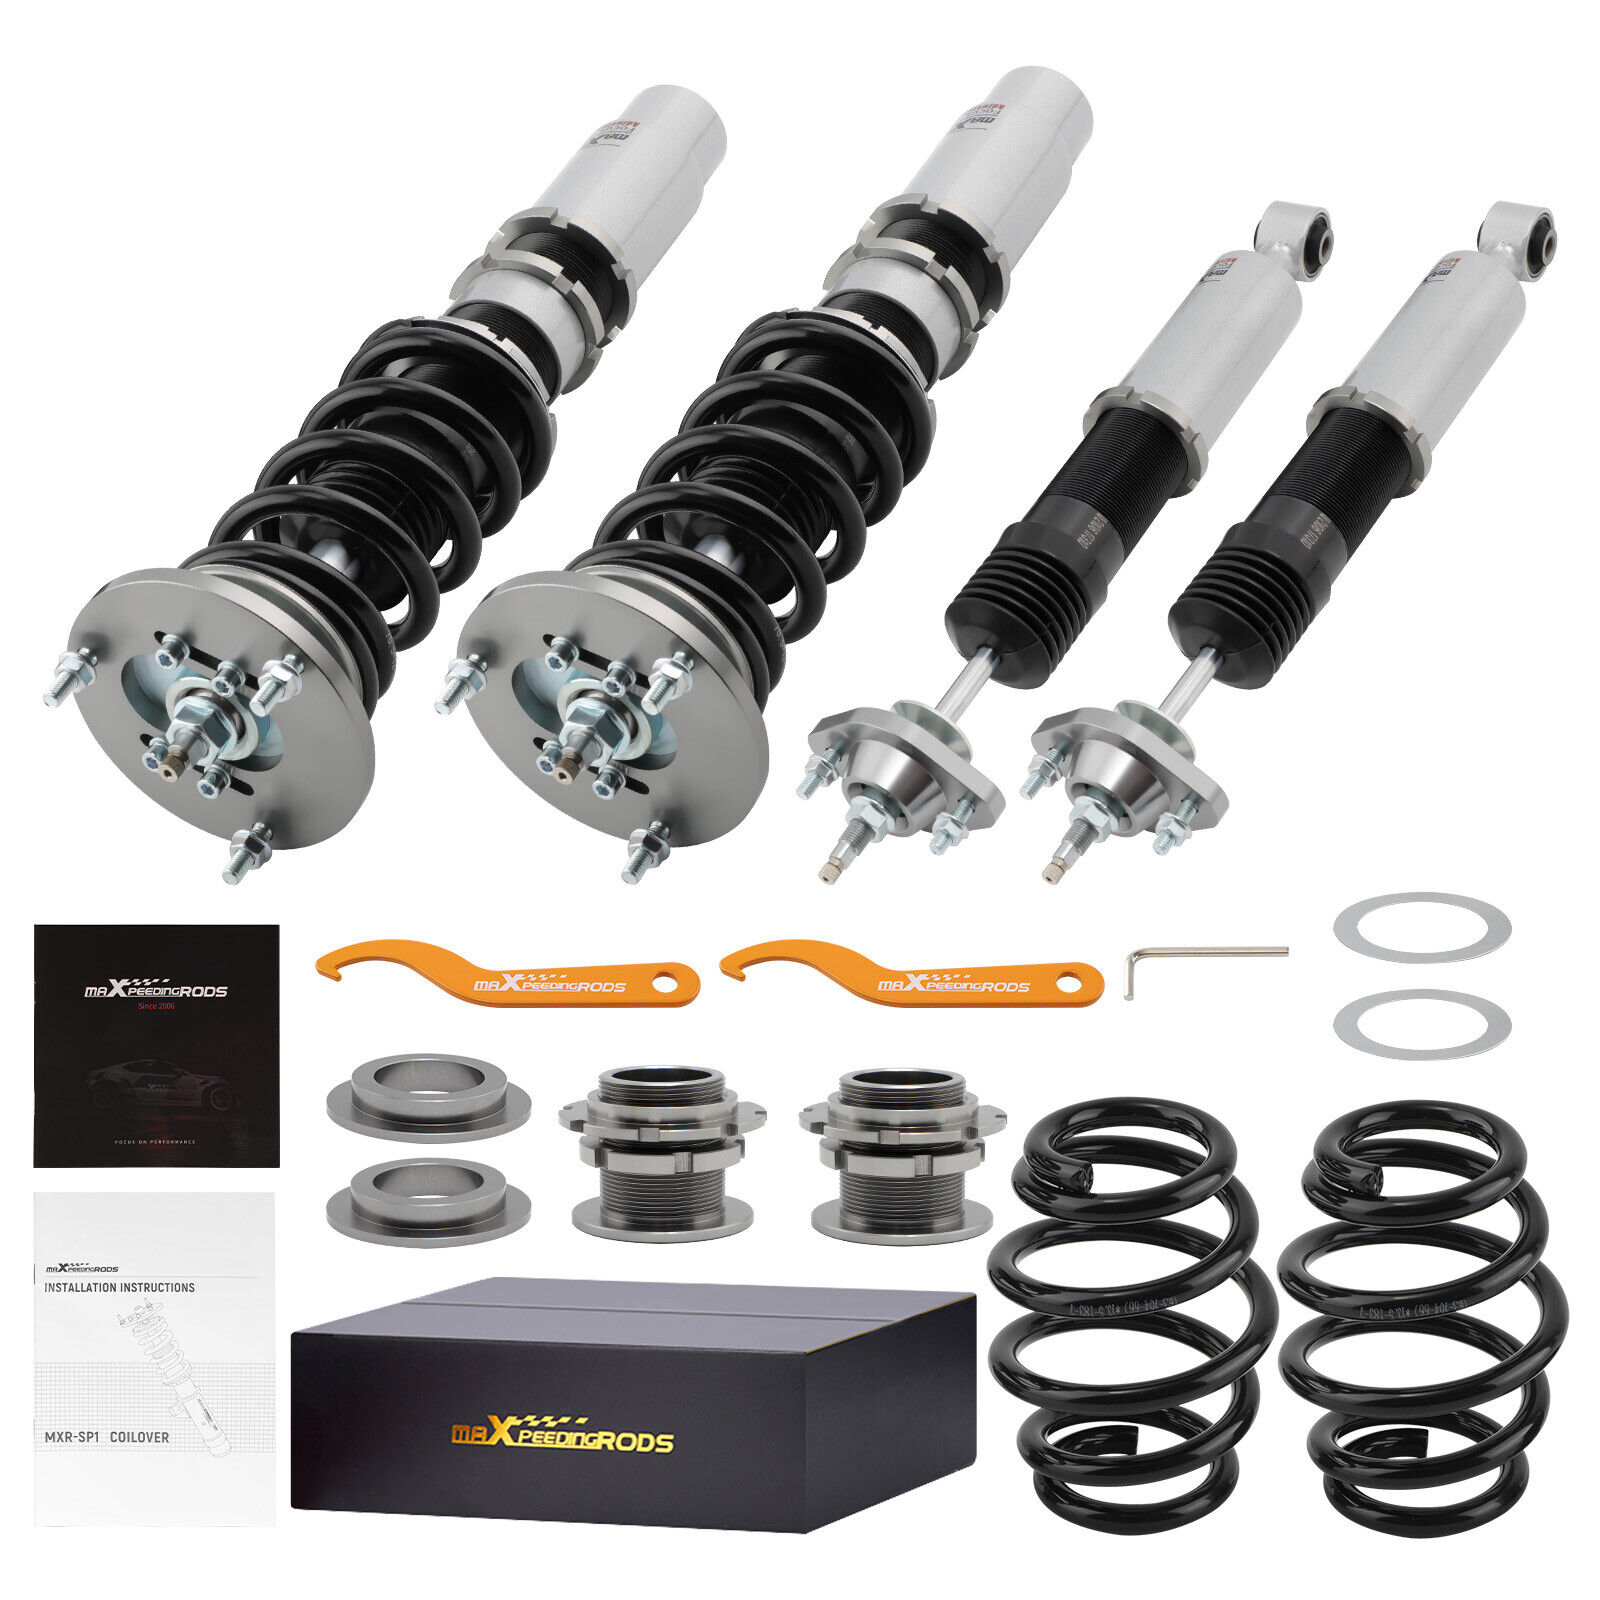 24 Click Damper Coilovers Shock Springs Lower Kit for BMW E46 328 325 330 98-05